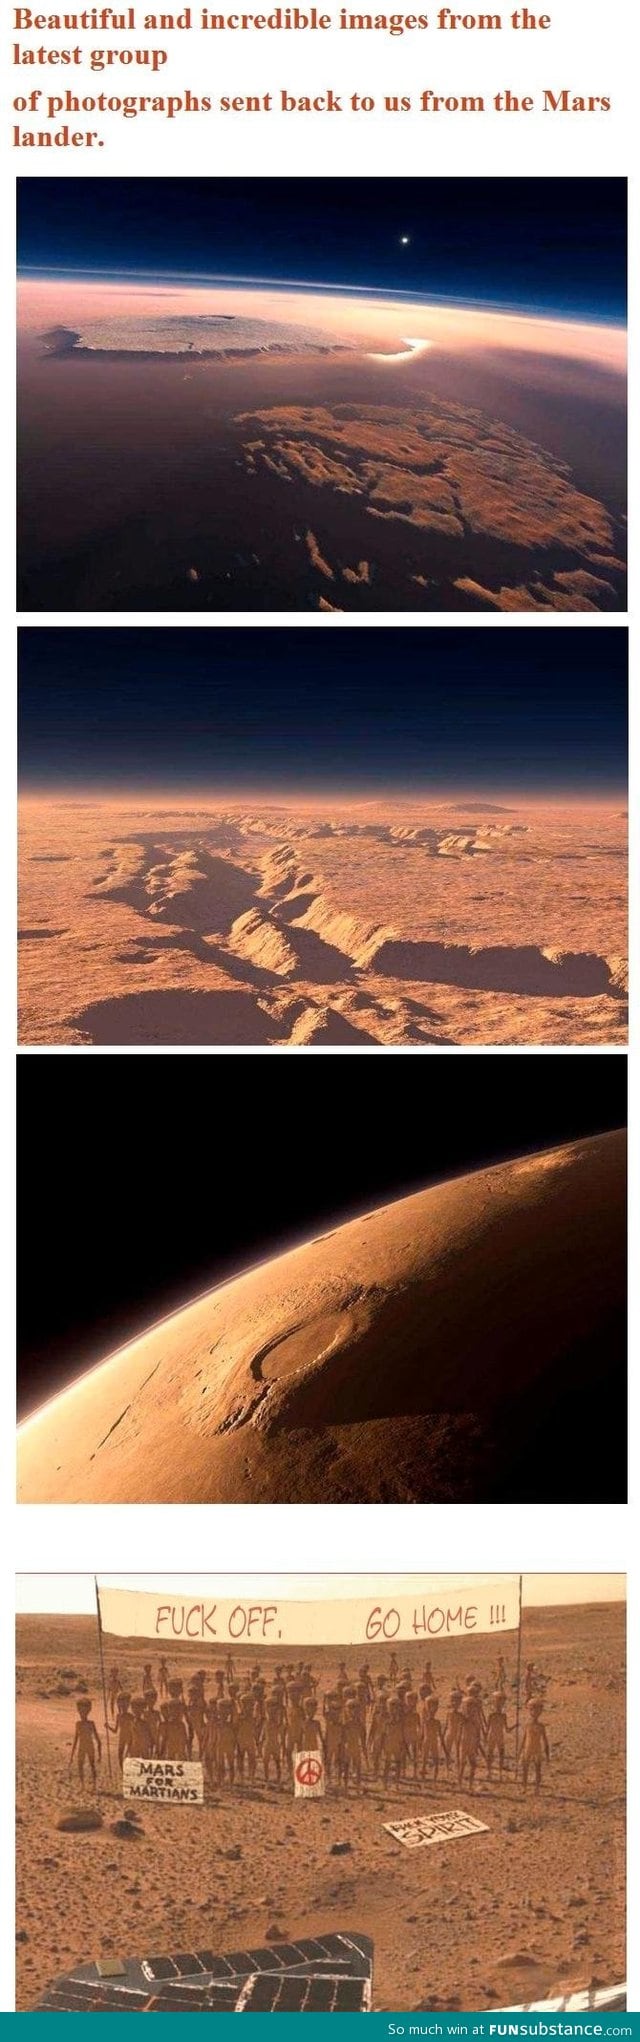 Amazing pictures from the Mars lander, Curiosity